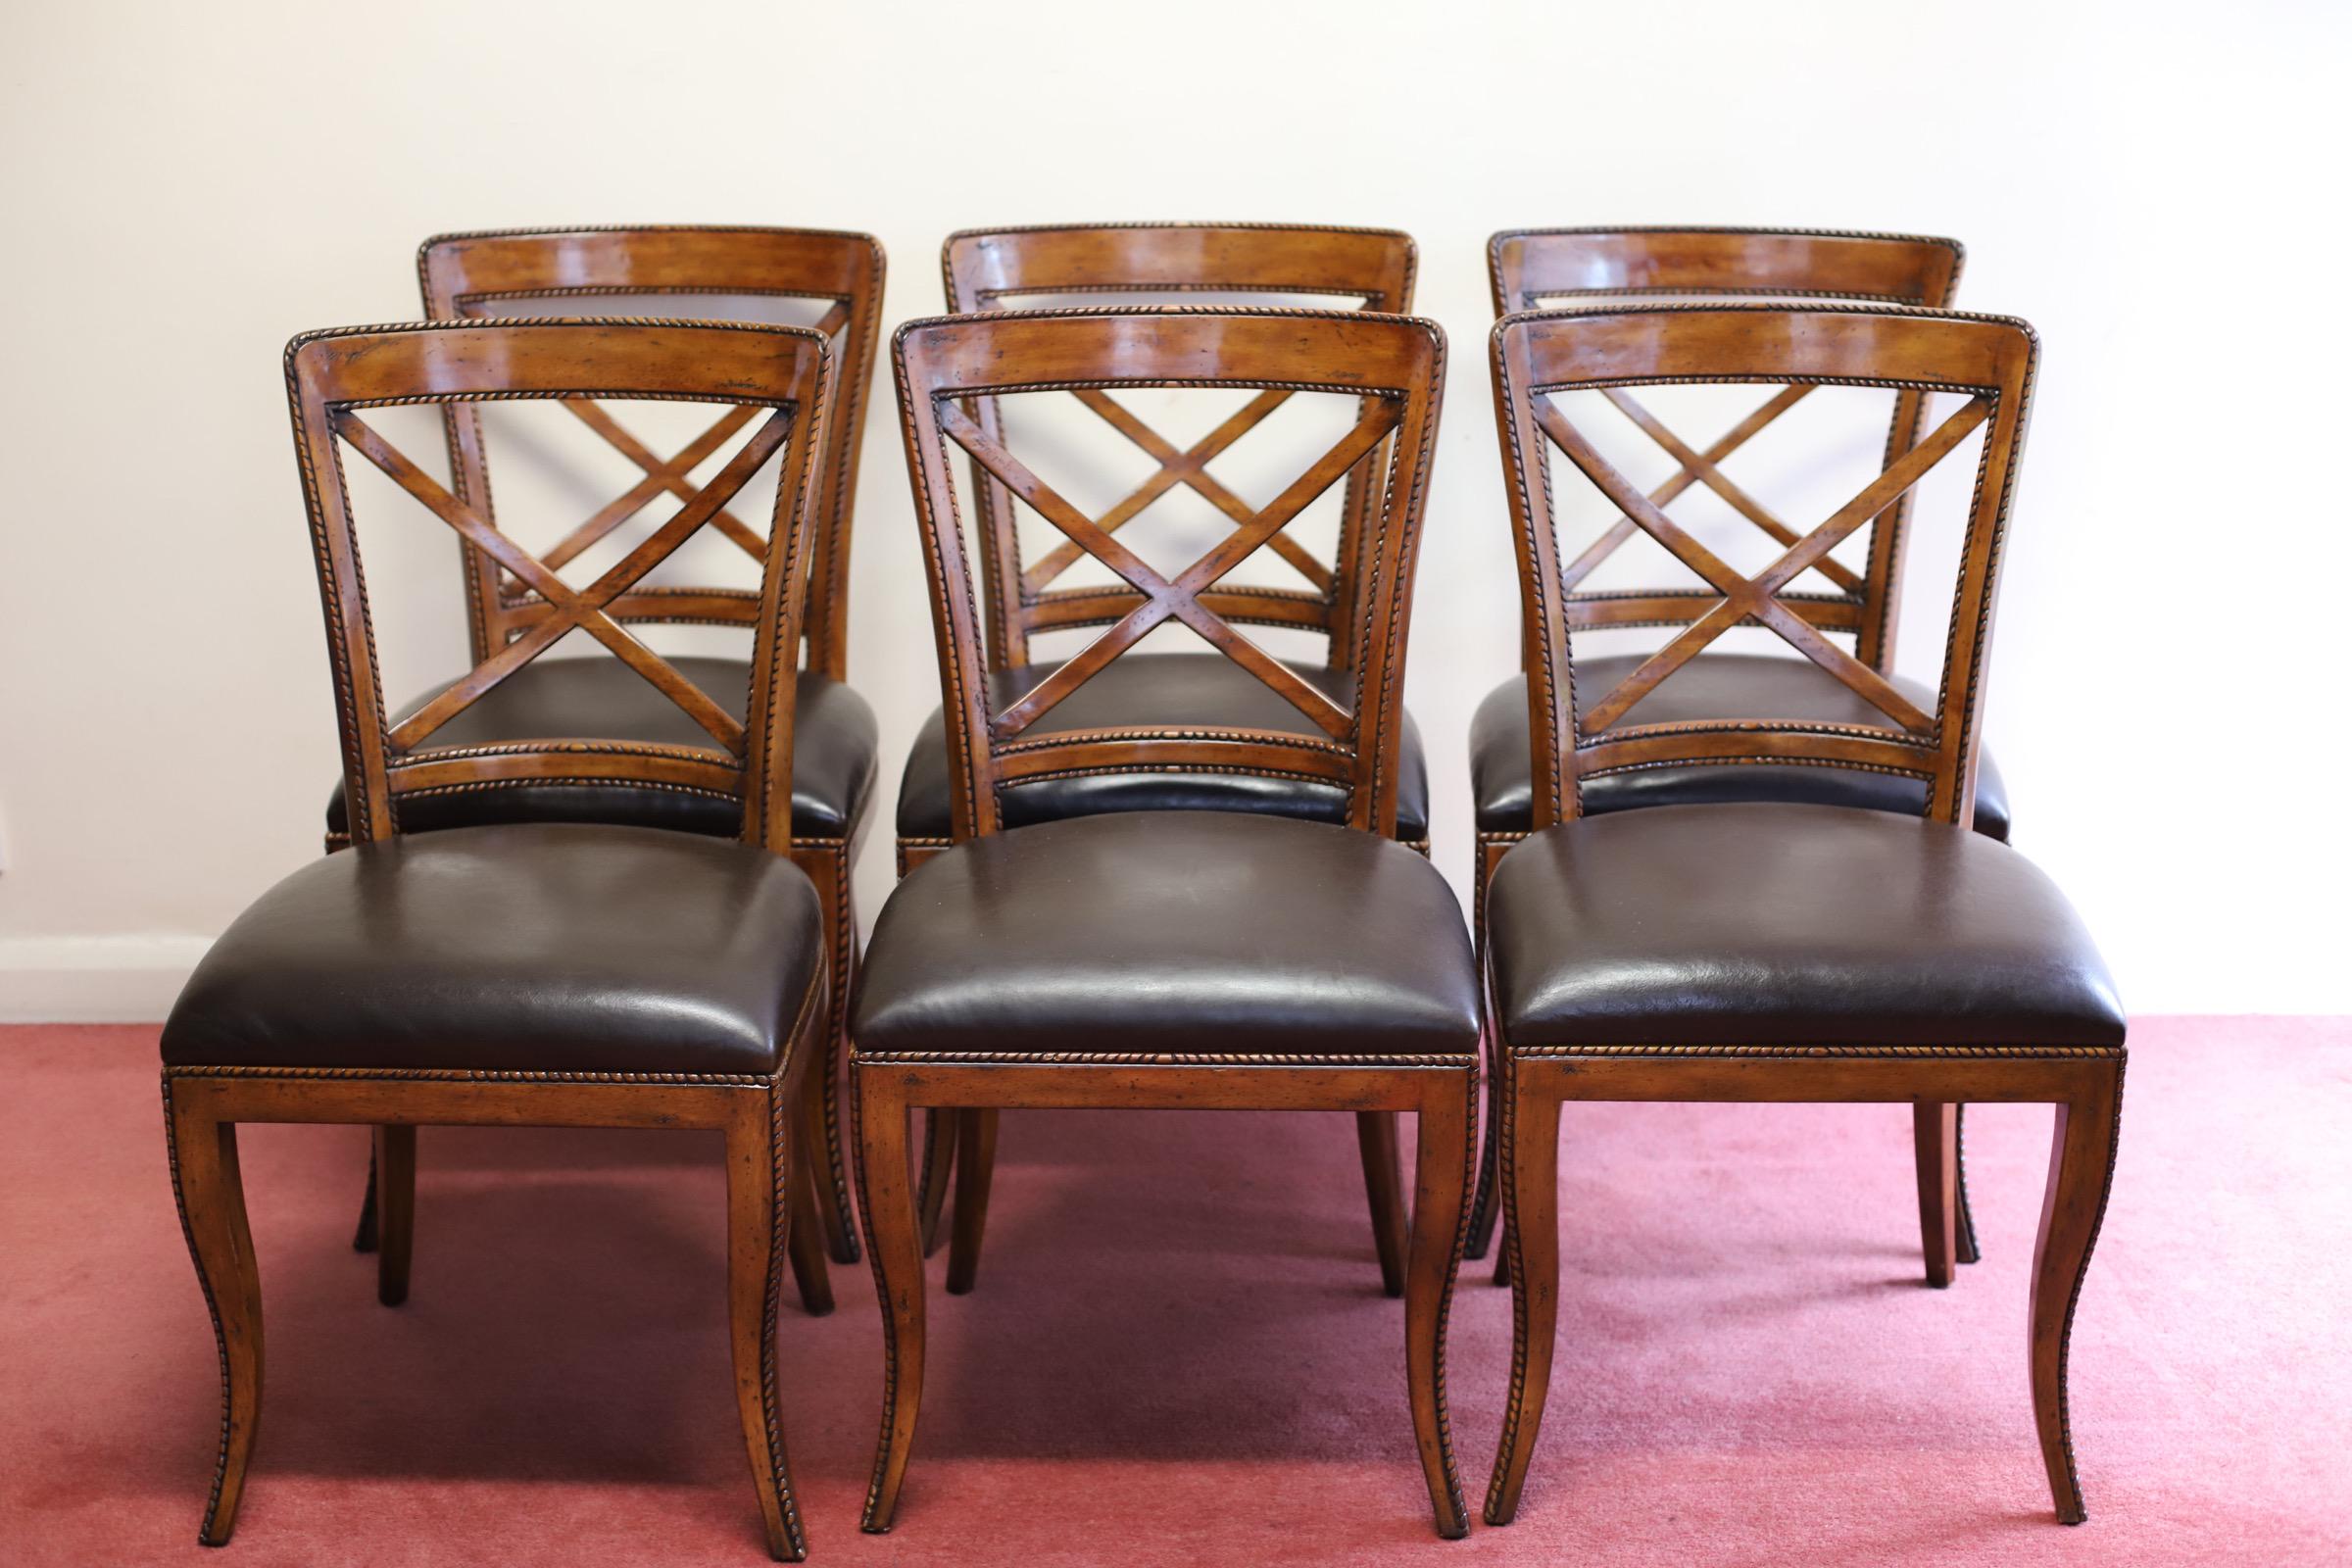 We are delight to ofer for sell this beautiful set of Six “Theodore Alexander” leather dining chairs , timber is some kind of flamed mahogany, it has a glorious patina throughout and they are in very good condition .
Don't hesitate to contact me if